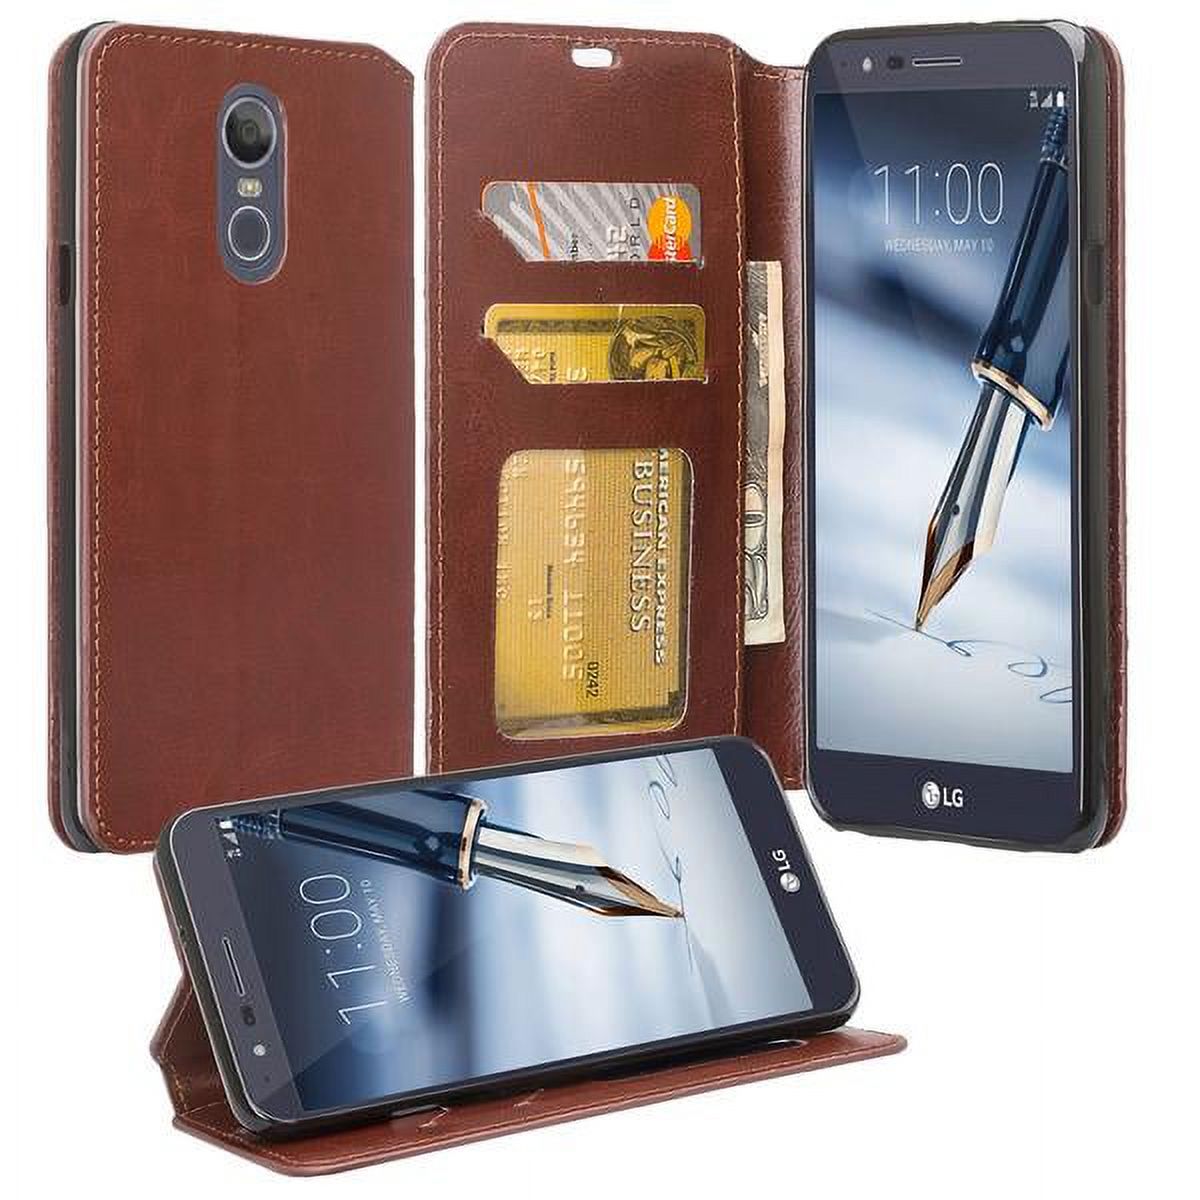 LG Stylo4 Case, LG Stylus4 Case, Slim Folio [Kickstand] Pu Leather Wallet Case Phone Case for LG Stylo4 - Brown - image 2 of 6